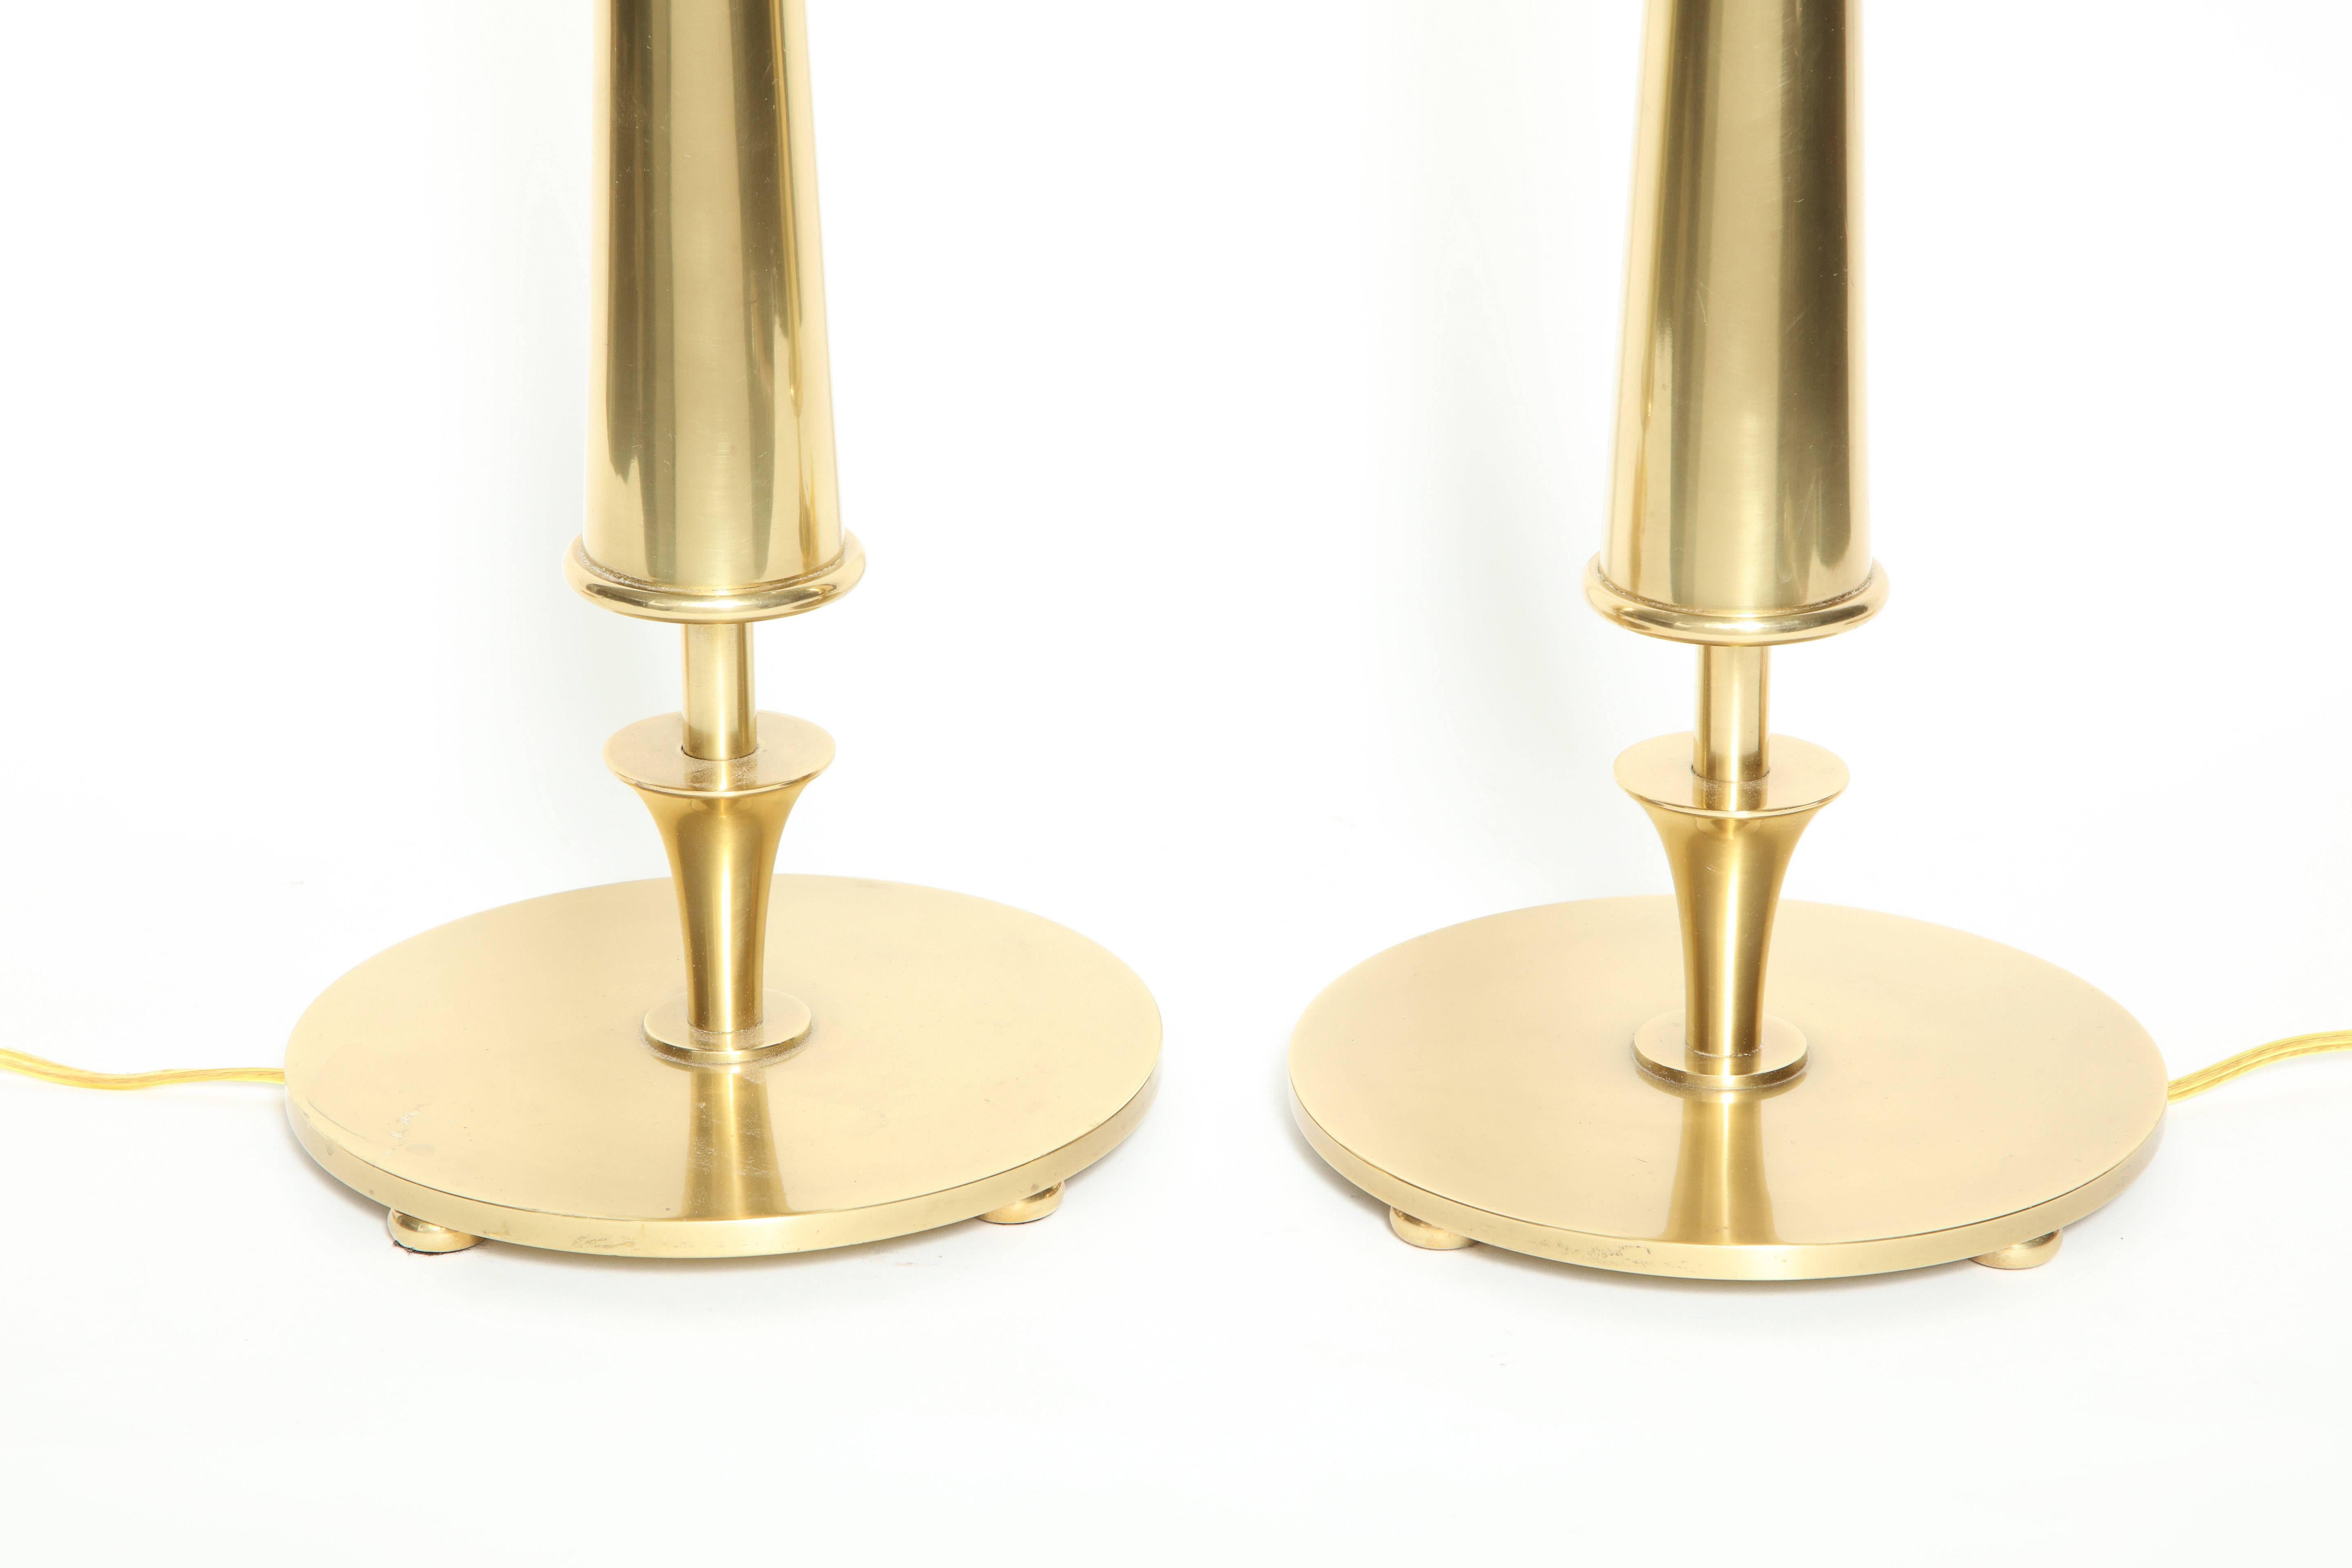 Modernist lamps with round bases and conical stems. Rewired.